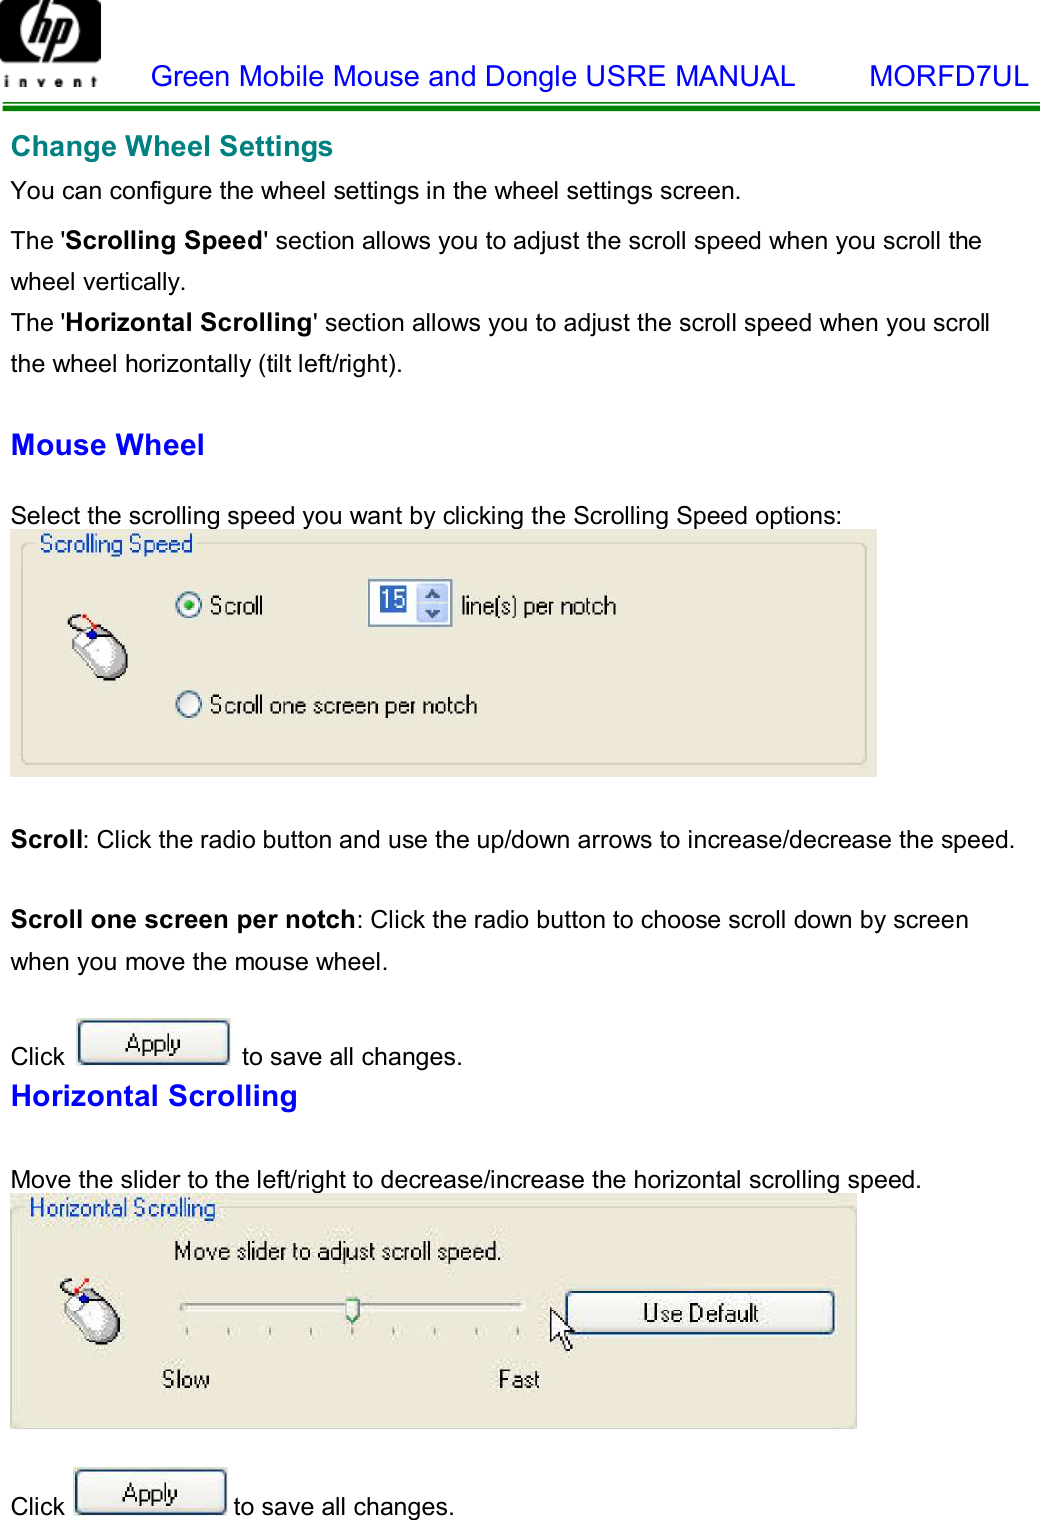    Green Mobile Mouse and Dongle USRE MANUAL     MORFD7UL    Change Wheel Settings  You can configure the wheel settings in the wheel settings screen.  The &apos;Scrolling Speed&apos; section allows you to adjust the scroll speed when you scroll the wheel vertically. The &apos;Horizontal Scrolling&apos; section allows you to adjust the scroll speed when you scroll  the wheel horizontally (tilt left/right).  Mouse Wheel   Select the scrolling speed you want by clicking the Scrolling Speed options:    Scroll: Click the radio button and use the up/down arrows to increase/decrease the speed.   Scroll one screen per notch: Click the radio button to choose scroll down by screen when you move the mouse wheel.  Click   to save all changes. Horizontal Scrolling   Move the slider to the left/right to decrease/increase the horizontal scrolling speed.     Click  to save all changes.  